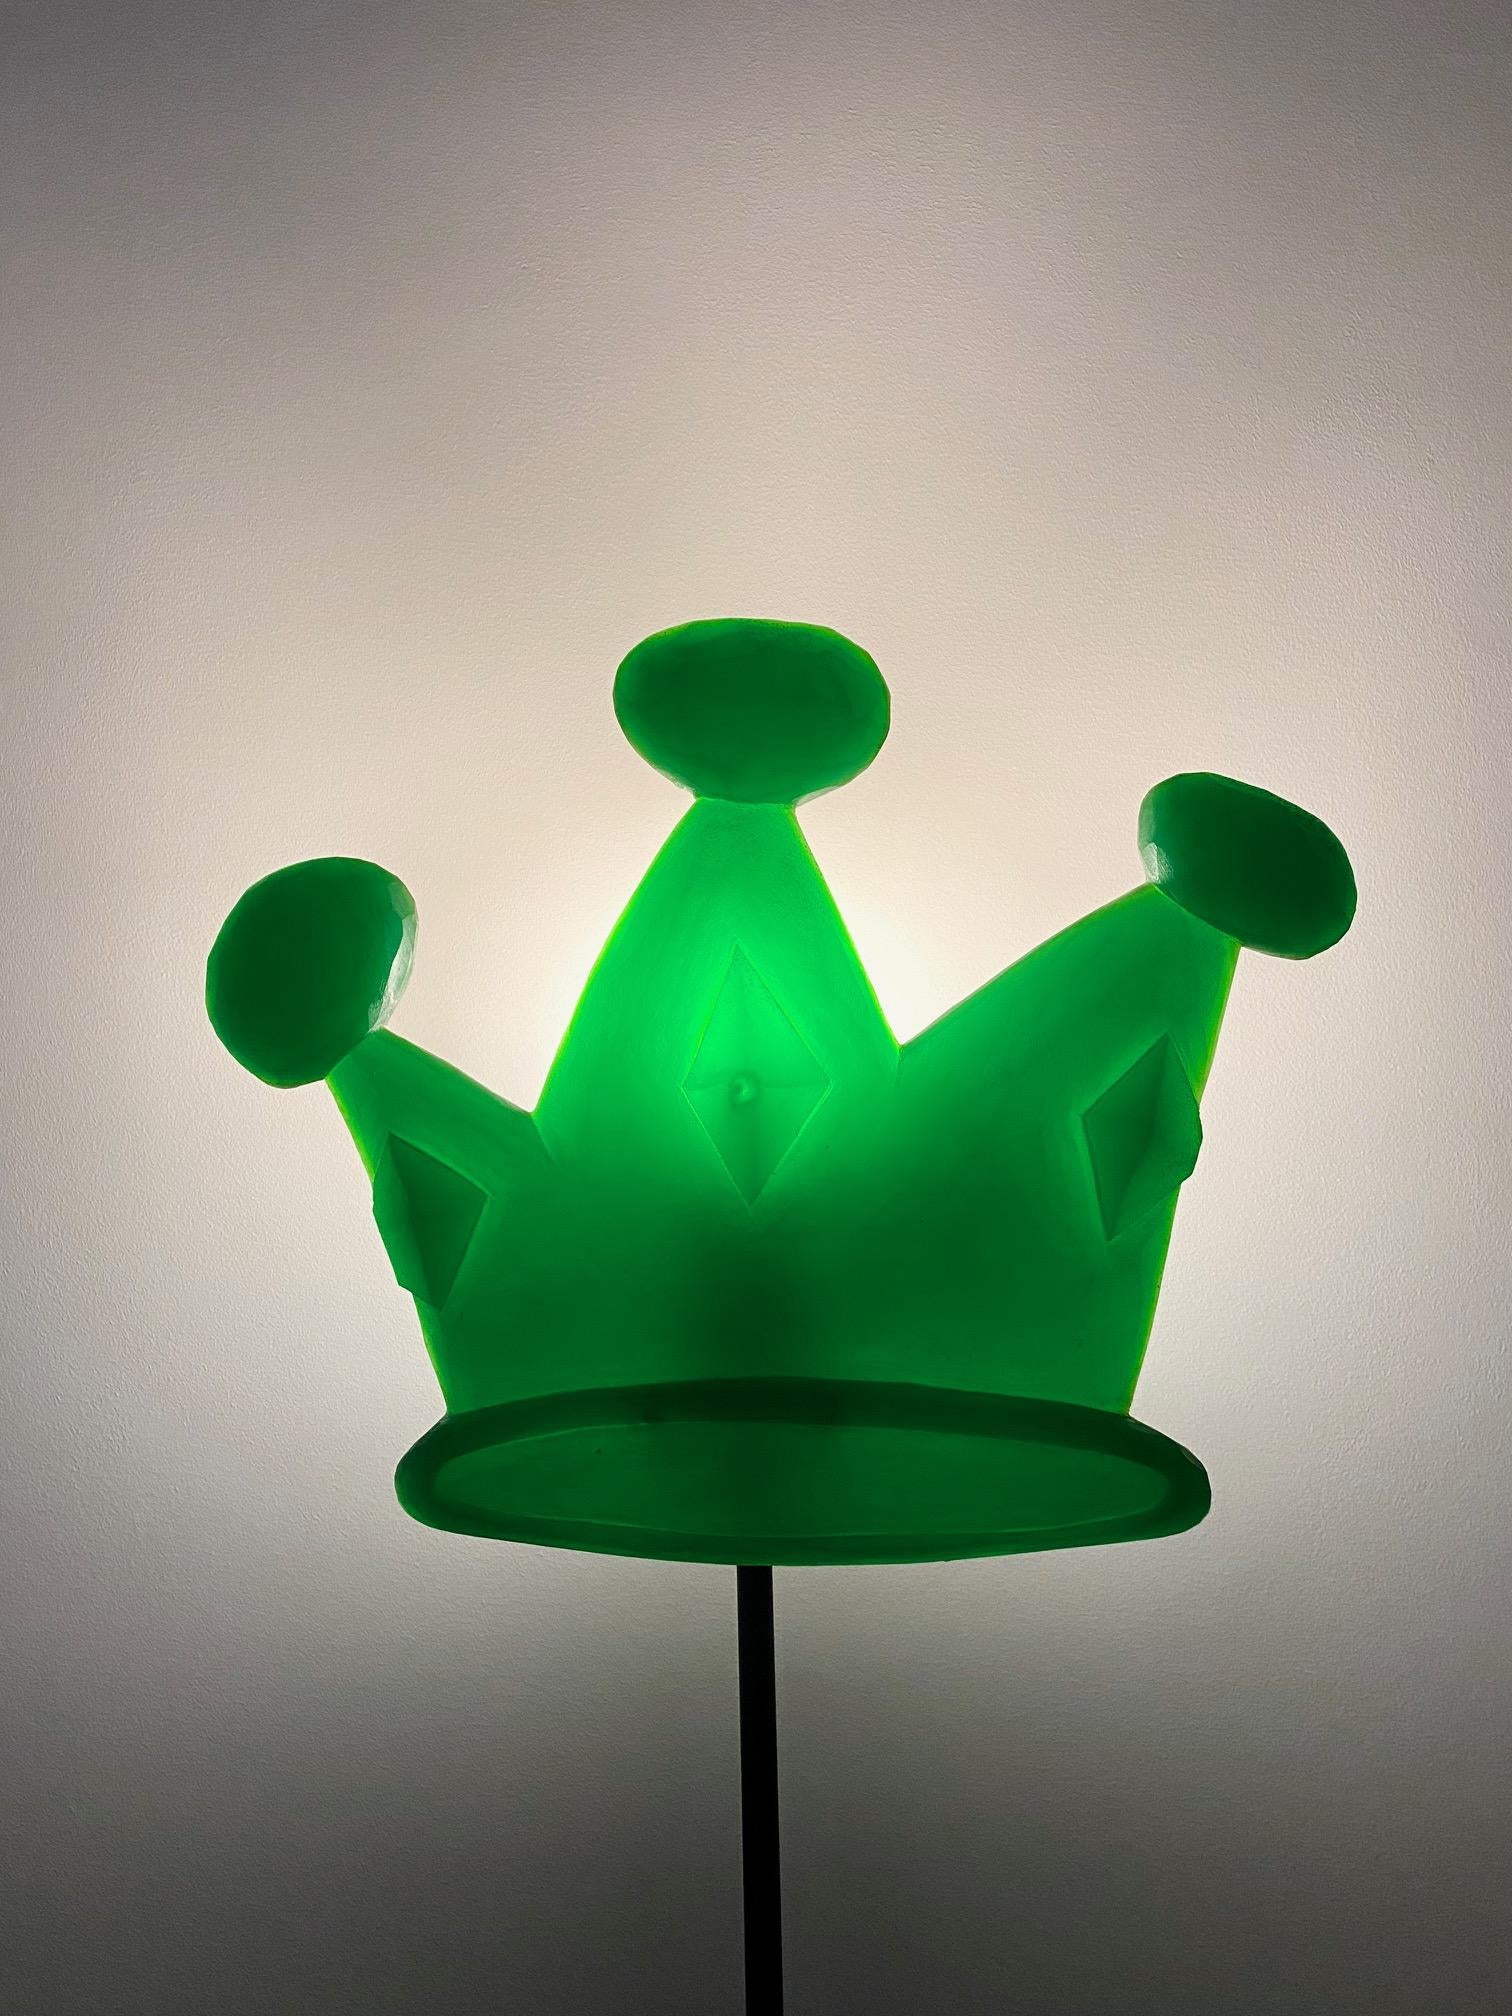 fairly odd parents crowns